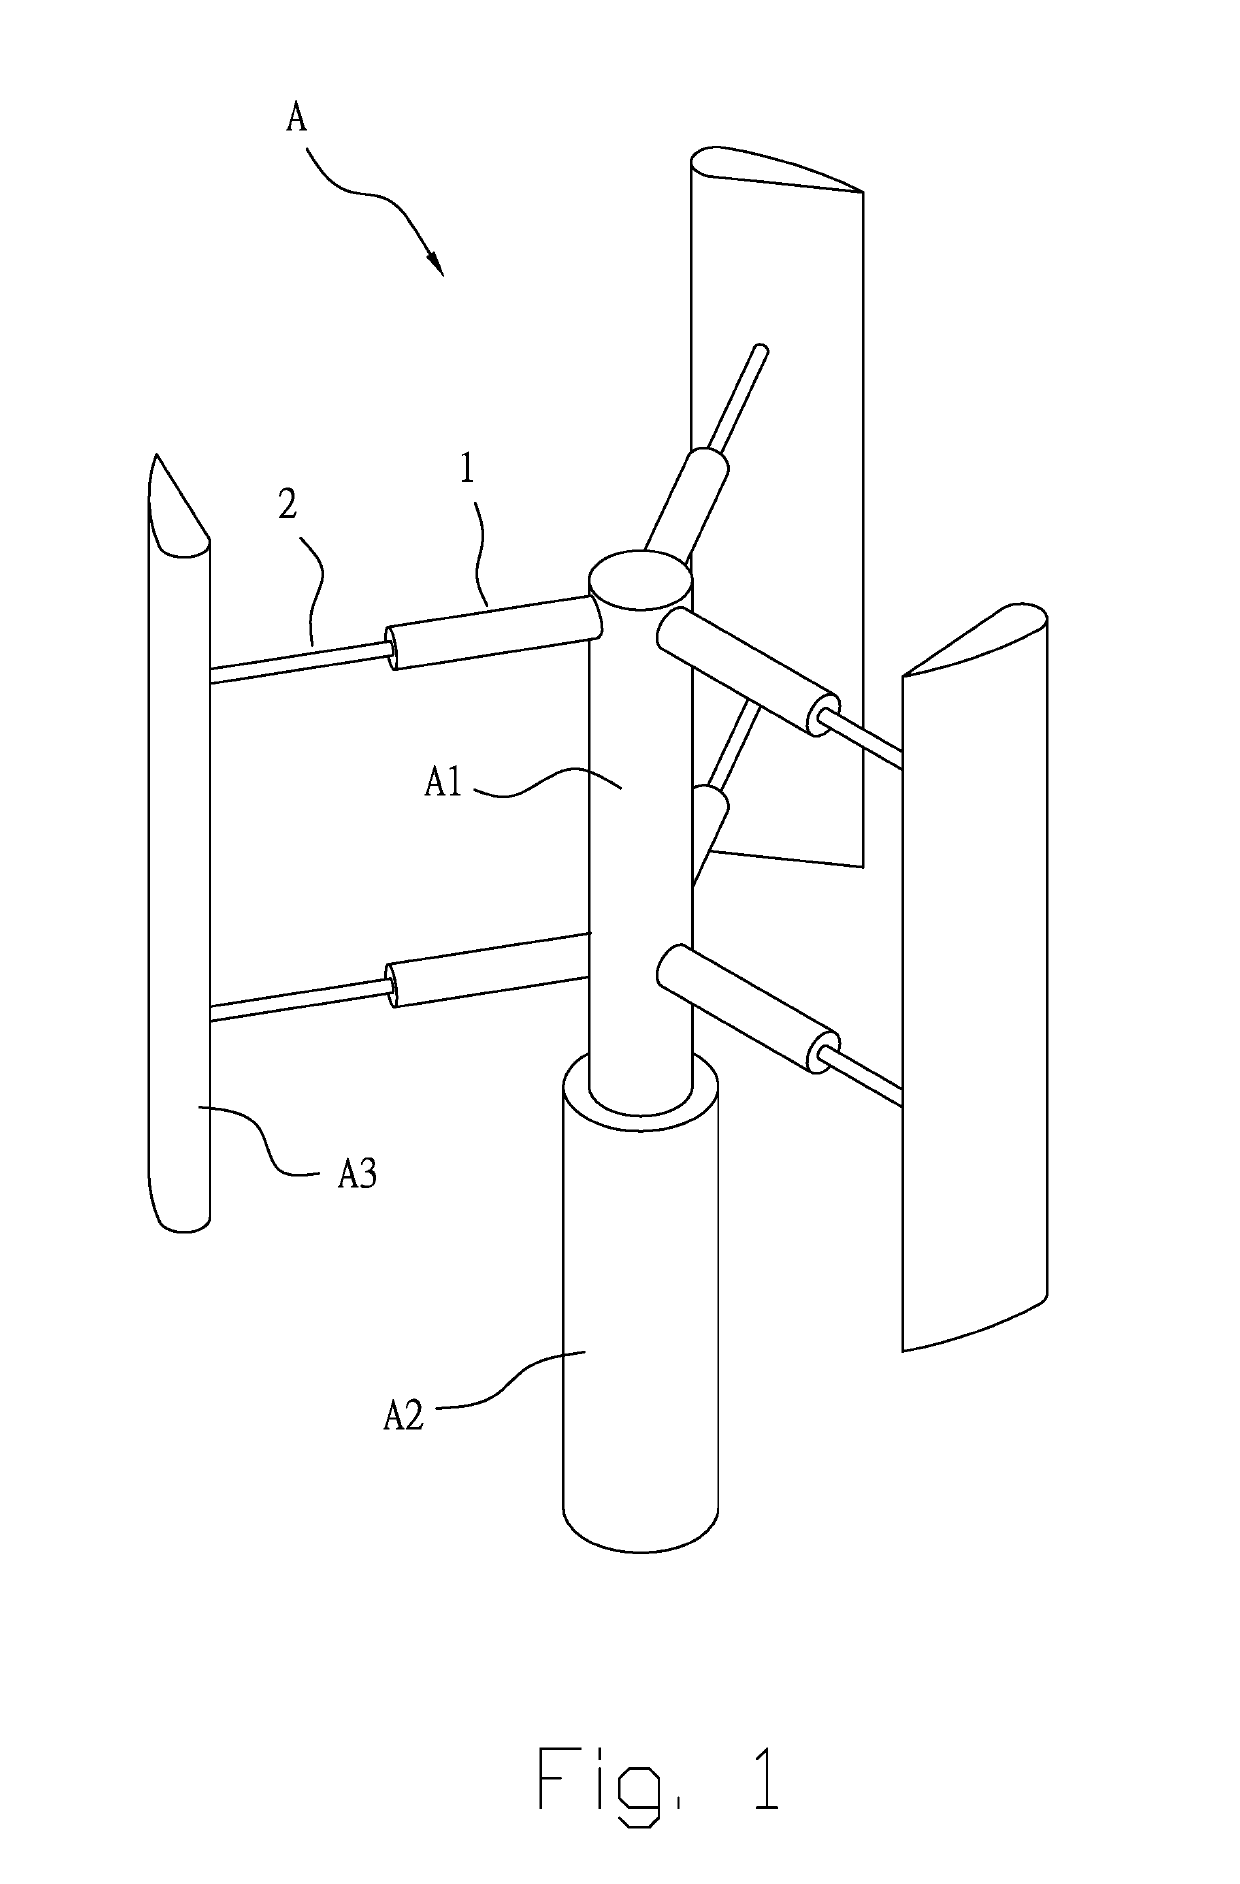 Vertical axis wind turbine with a telescopic rotational diameter